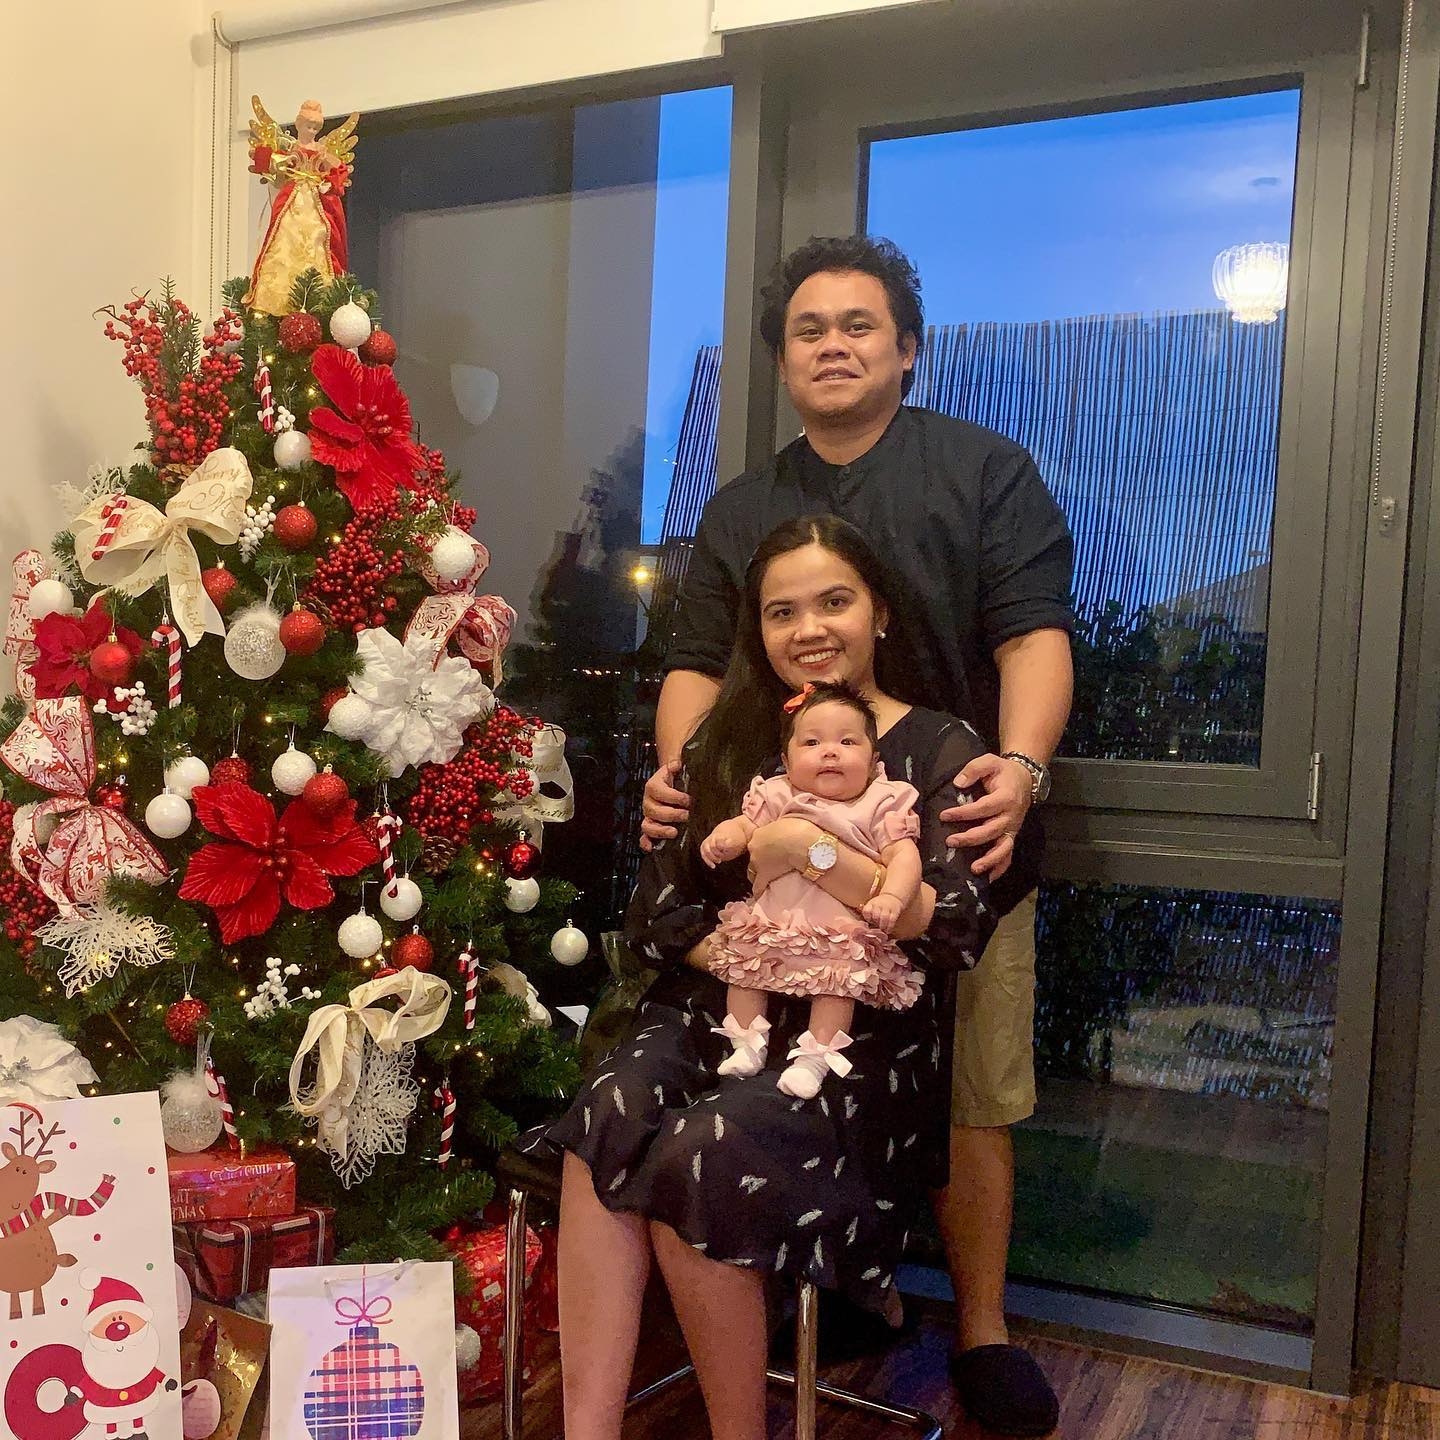 A man, woman and baby beside a Christmas tree